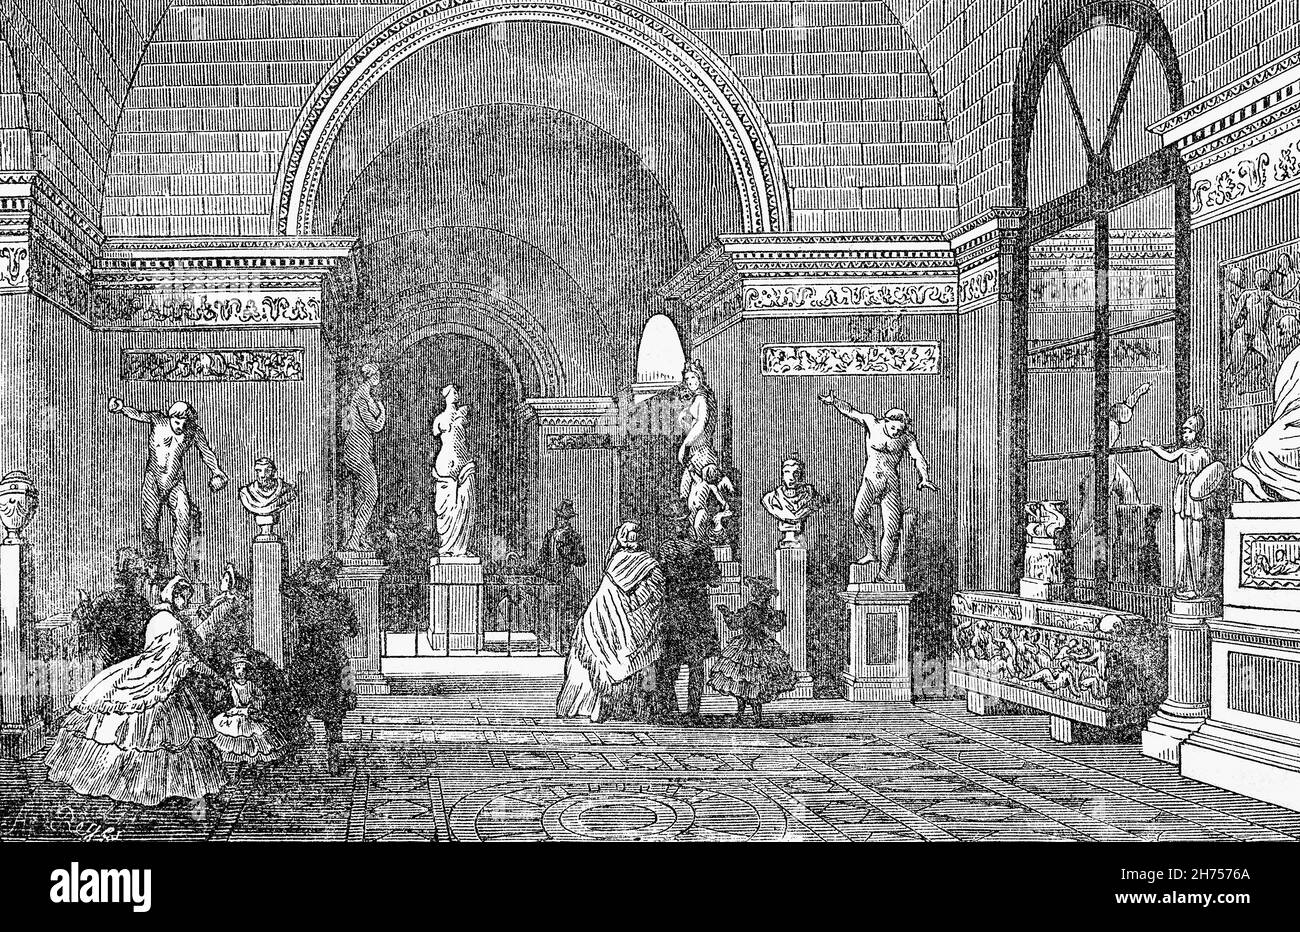 A late 19th Century illustration of the Gallery of Ancient Sculptures in the Louvre Palace, located on the Right Bank of the Seine in Paris, between the Tuileries Gardens and the church of Saint-Germain l'Auxerrois. Originally a military facility, it has served numerous government-related functions and intermittently as a royal residence between the 14th and 18th centuries. Henry IV, France's new king from 1589 is associated with the Grand Dessein ('Grand Design') of uniting the Louvre and the Tuileries in a single building. Stock Photo